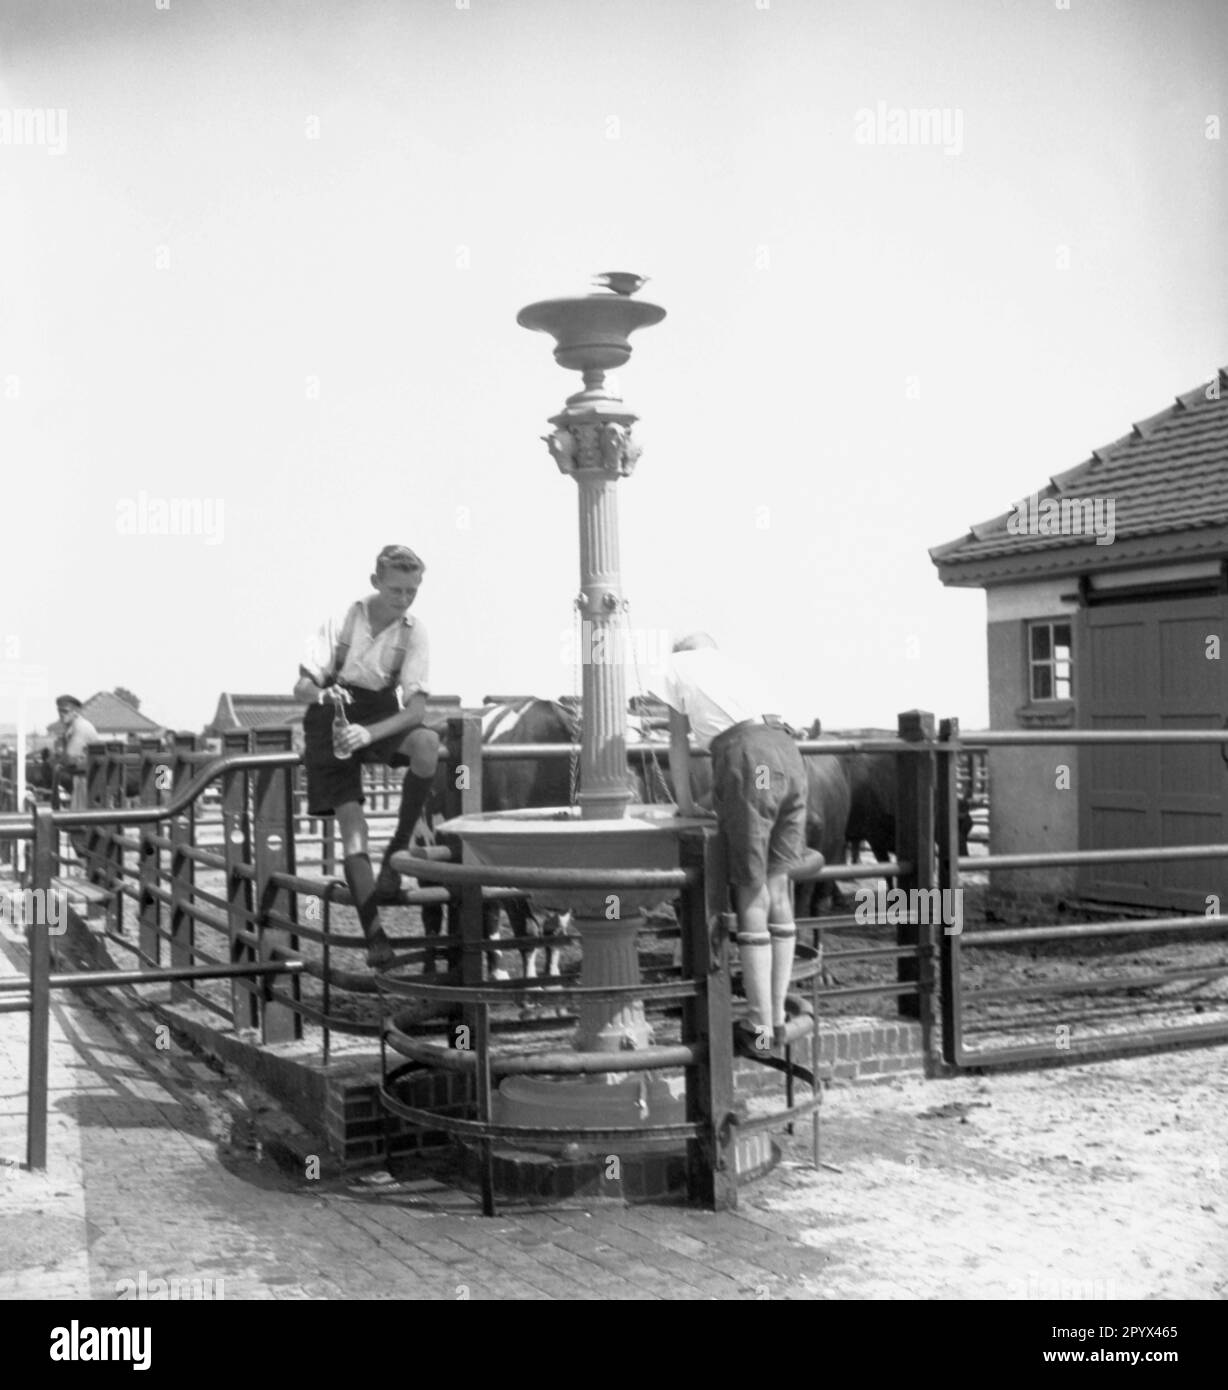 Undated photo of boys in shorts sitting on a cast-iron water pump (with horse head decoration) at the cattle market (new cattle market) in Husum, Nordfriesland, Schleswig-Holstein. In the background, enclosures with cattle and a drover. Stock Photo